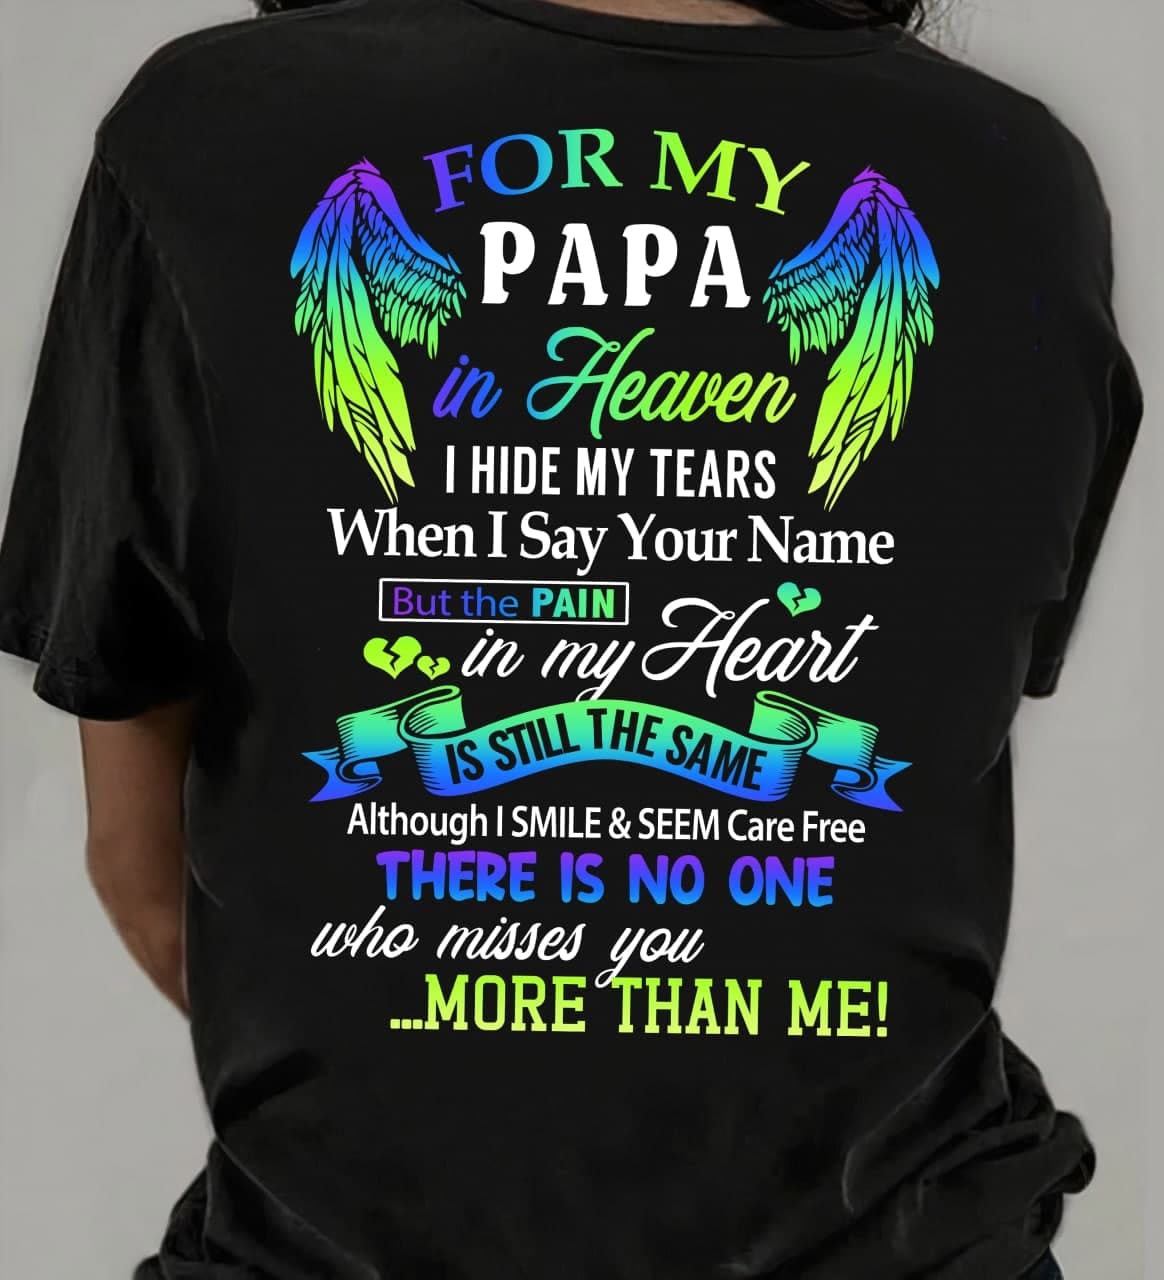 For my papa in heaven i hide my tears when i say your name but the pain in my heart is still the same